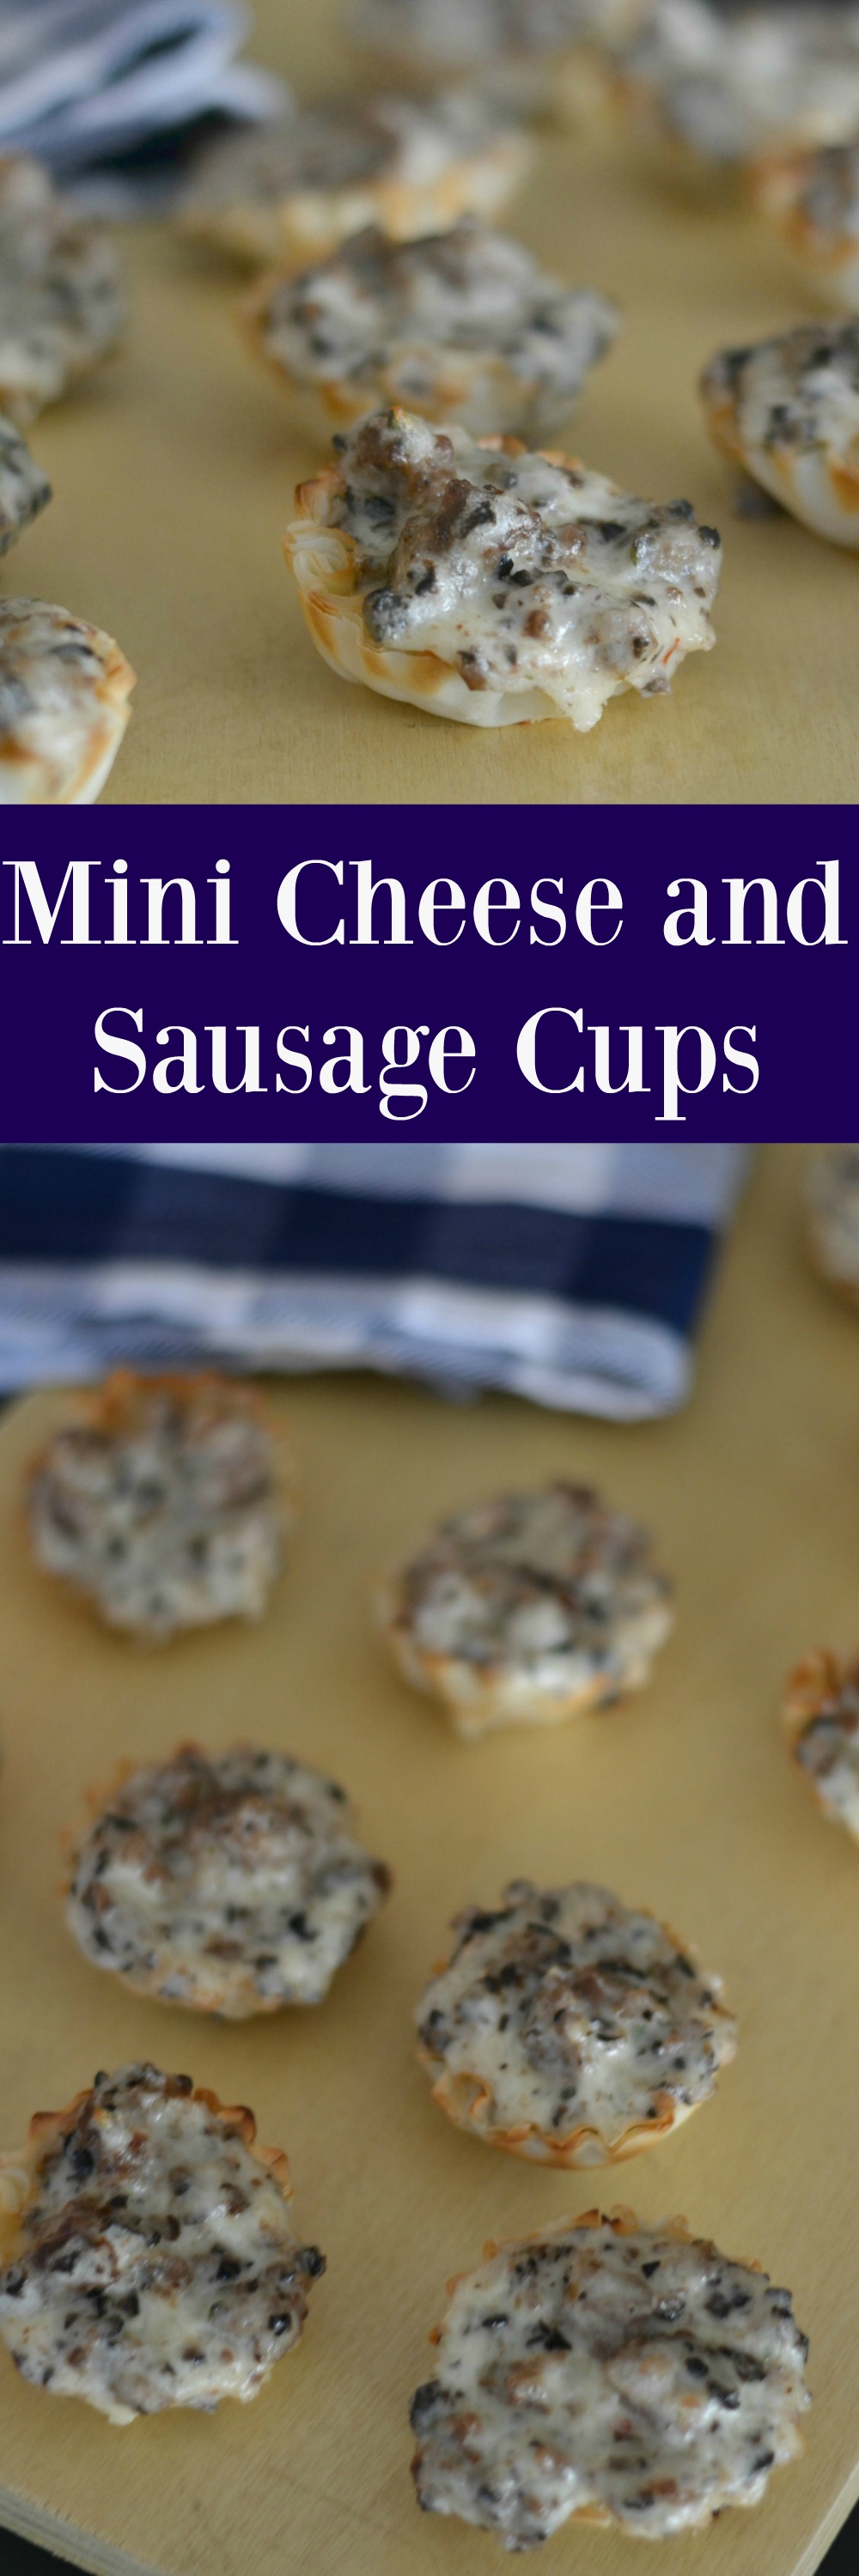 Mini Cheese and Sausage Cups Appetizer